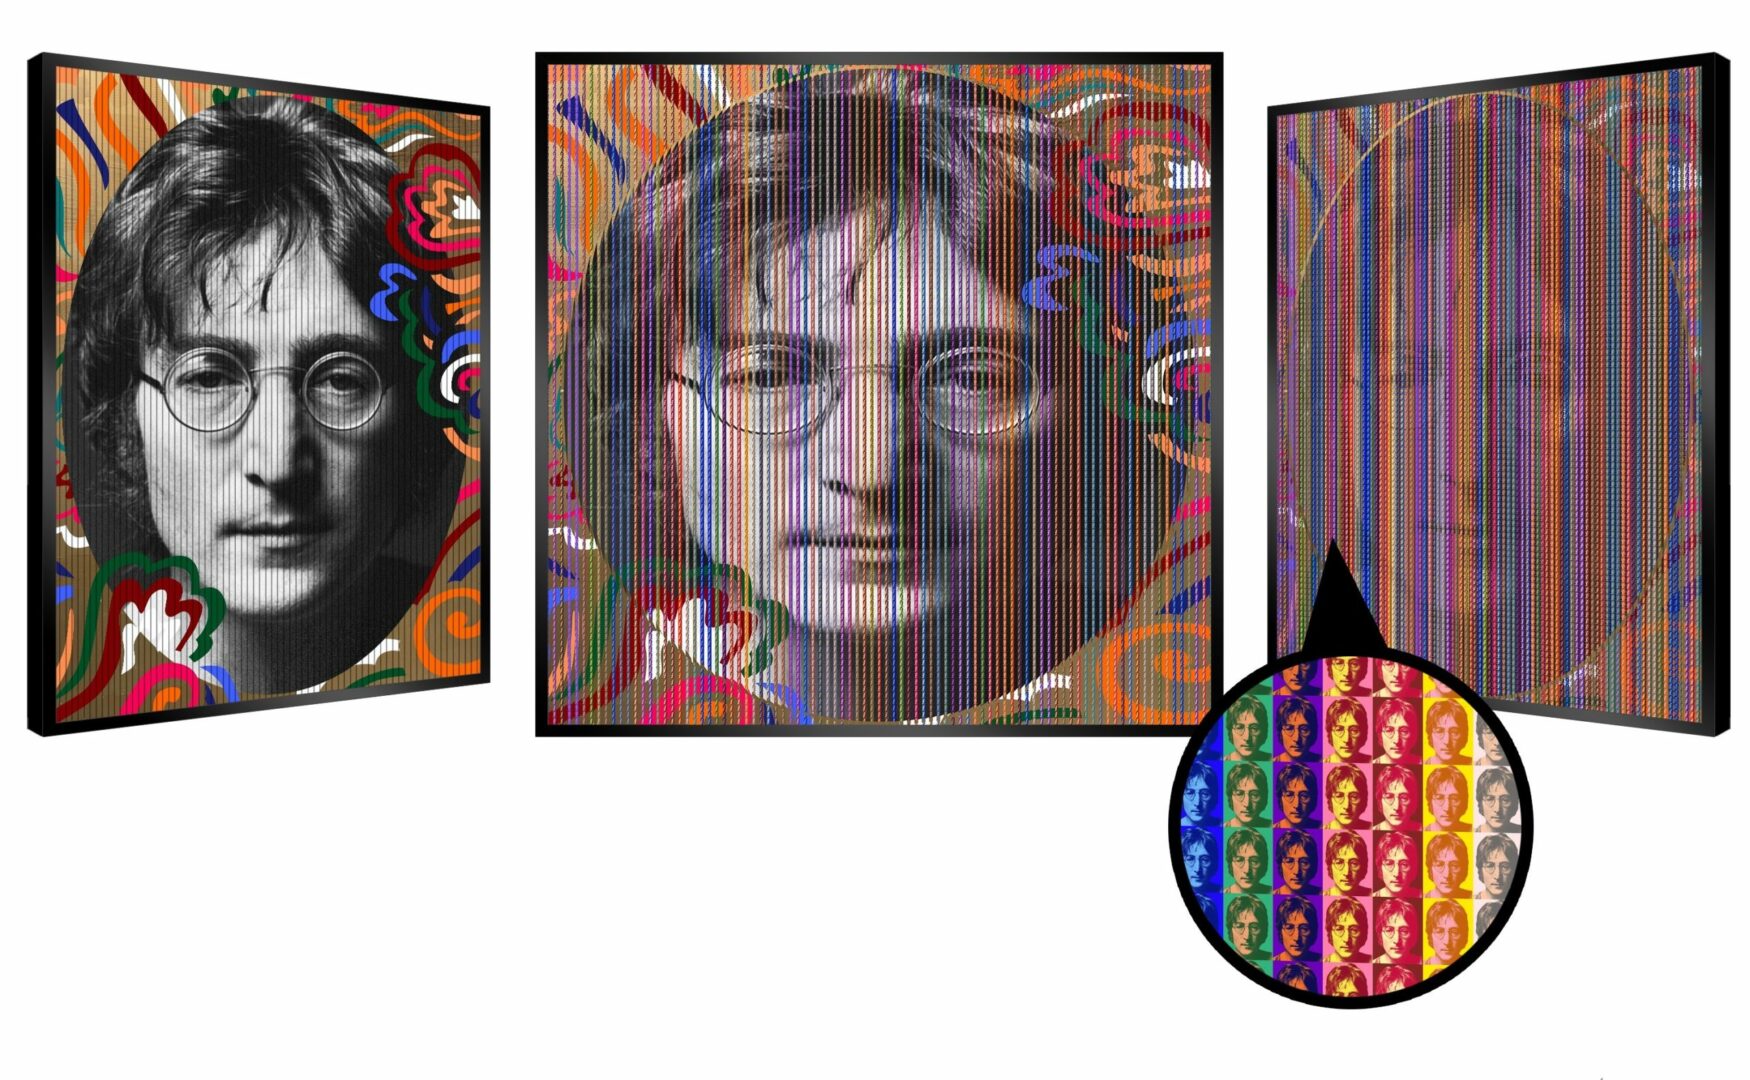 Picture of a unique piece depicting John Lennon by French artist Patrick Rubinstein, represented at Galerie Montmartre, Paris, France